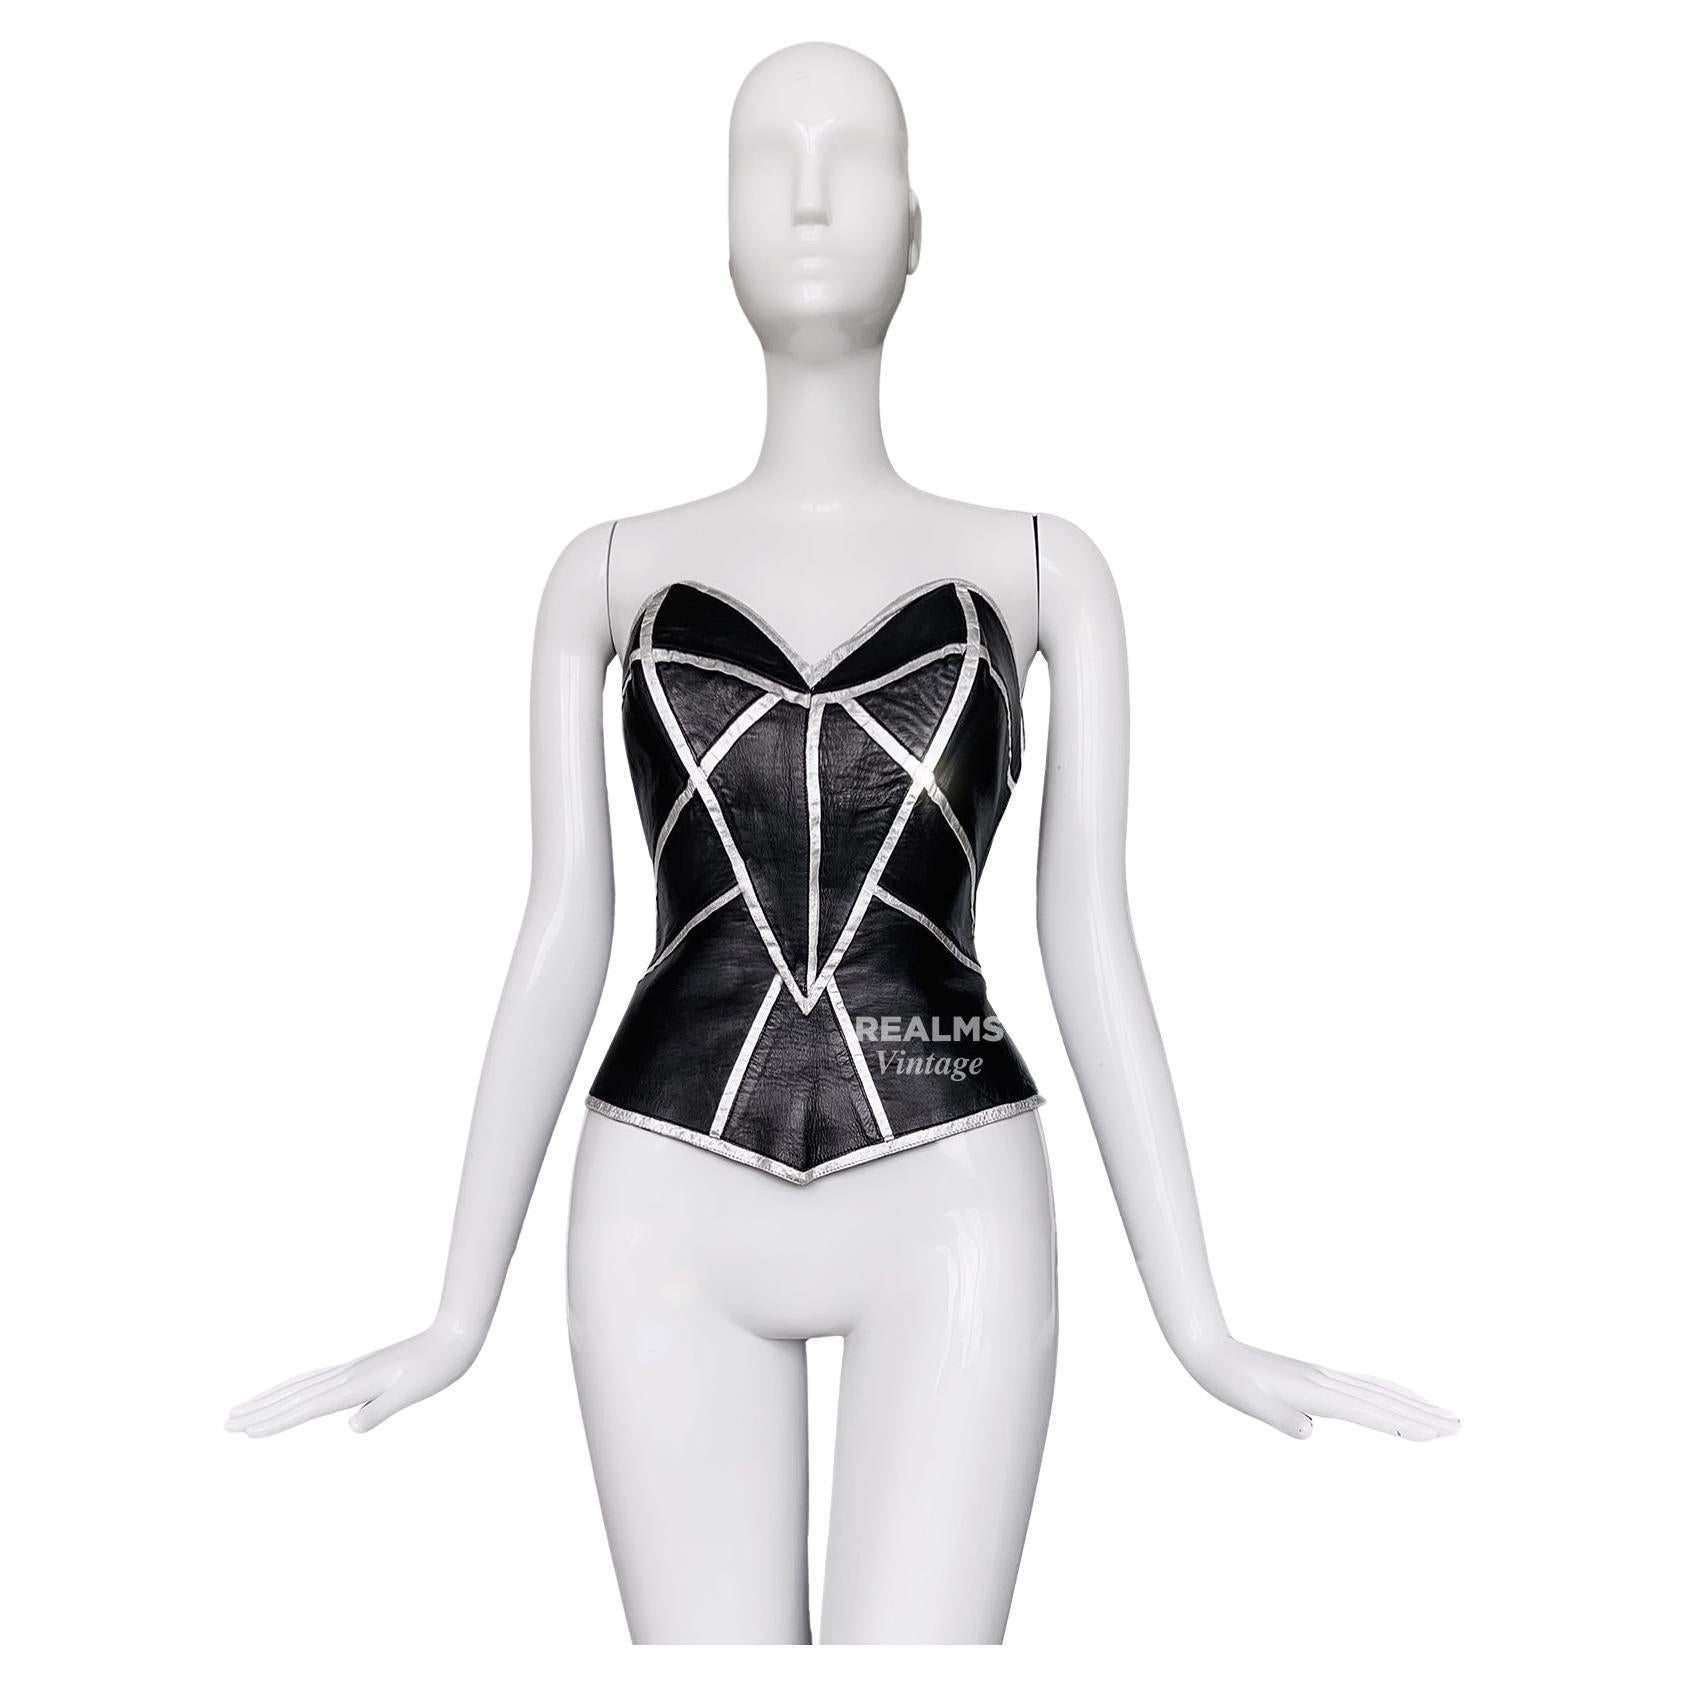 Thierry Mugler Couture 2001 Archival Leather Corset Top Bustier For Sale